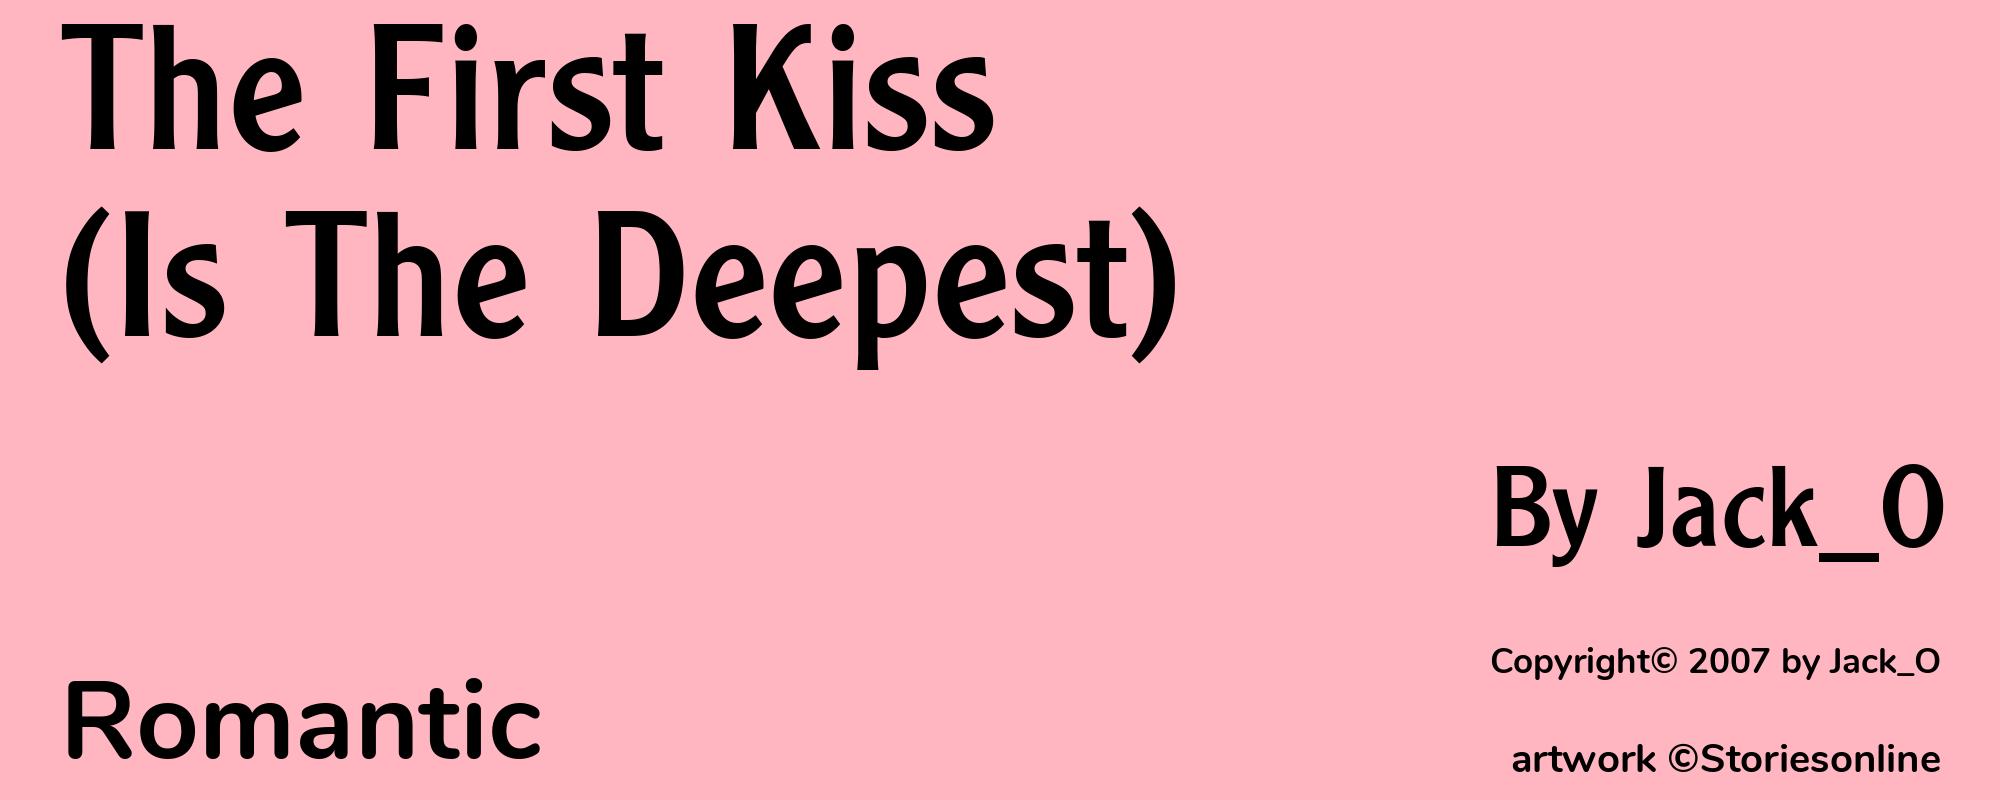 The First Kiss (Is The Deepest) - Cover